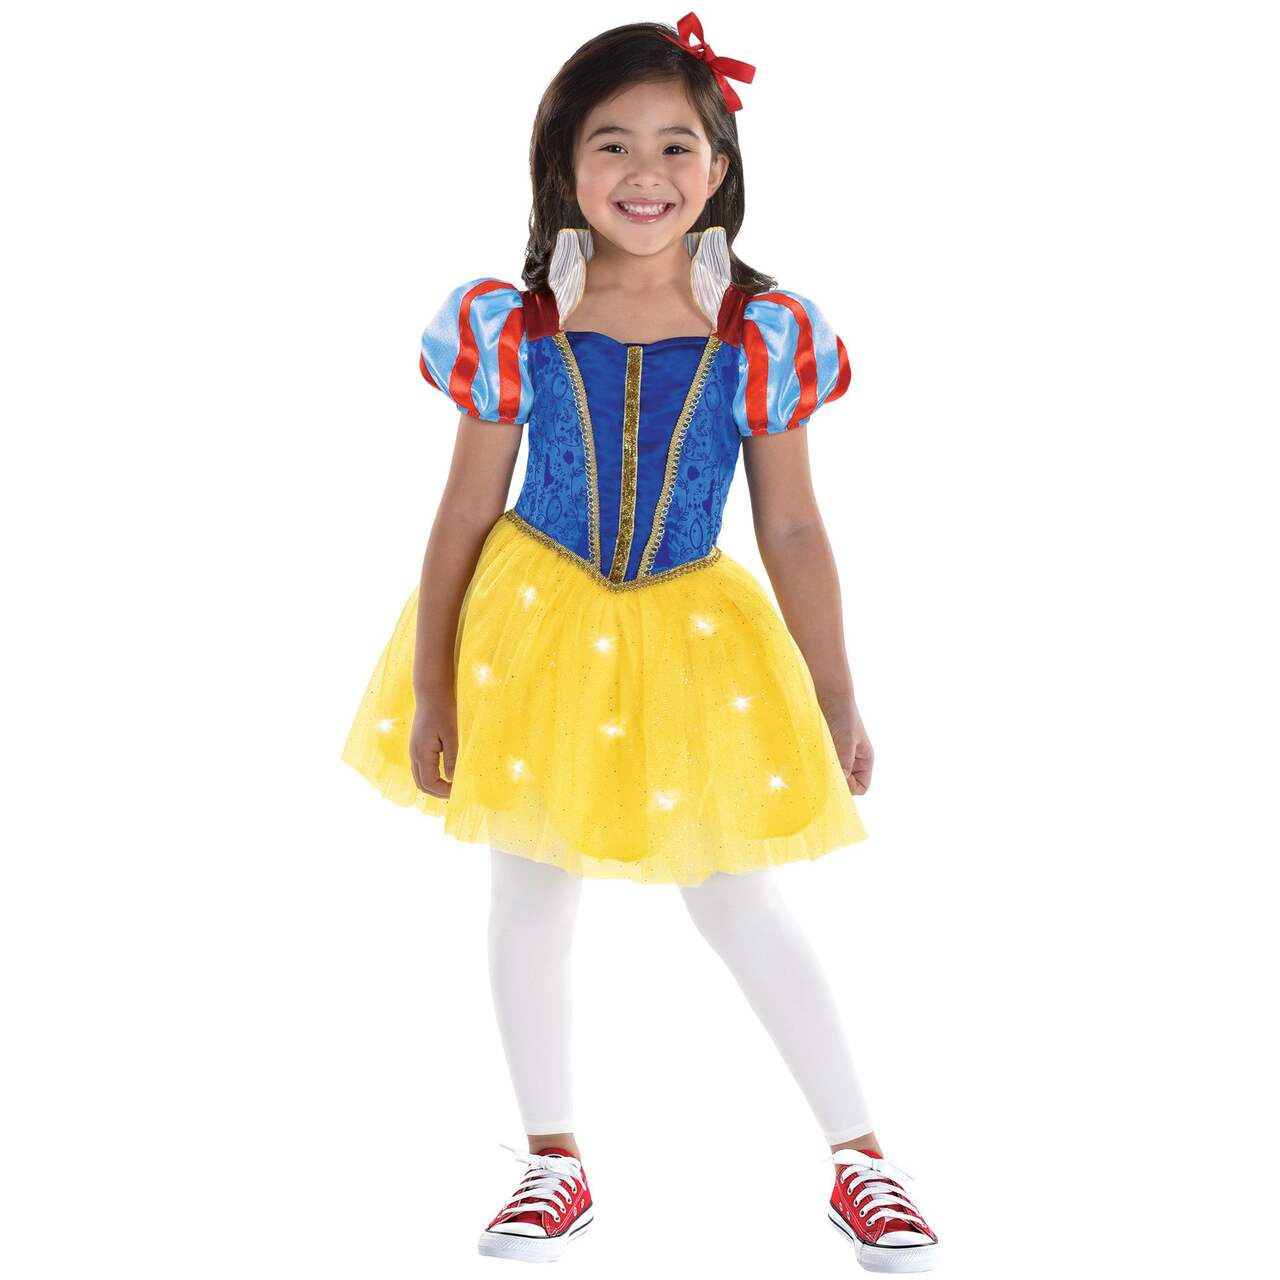 https://media-www.canadiantire.ca/product/seasonal-gardening/party-city-seasonal/party-city-halloween-and-fall-decor/8550809/snow-white-light-up-girl-costume-small-4-6-5c6c1d4b-0e4a-445a-a65a-13ce453355d1-jpgrendition.jpg?imdensity=1&imwidth=640&impolicy=mZoom